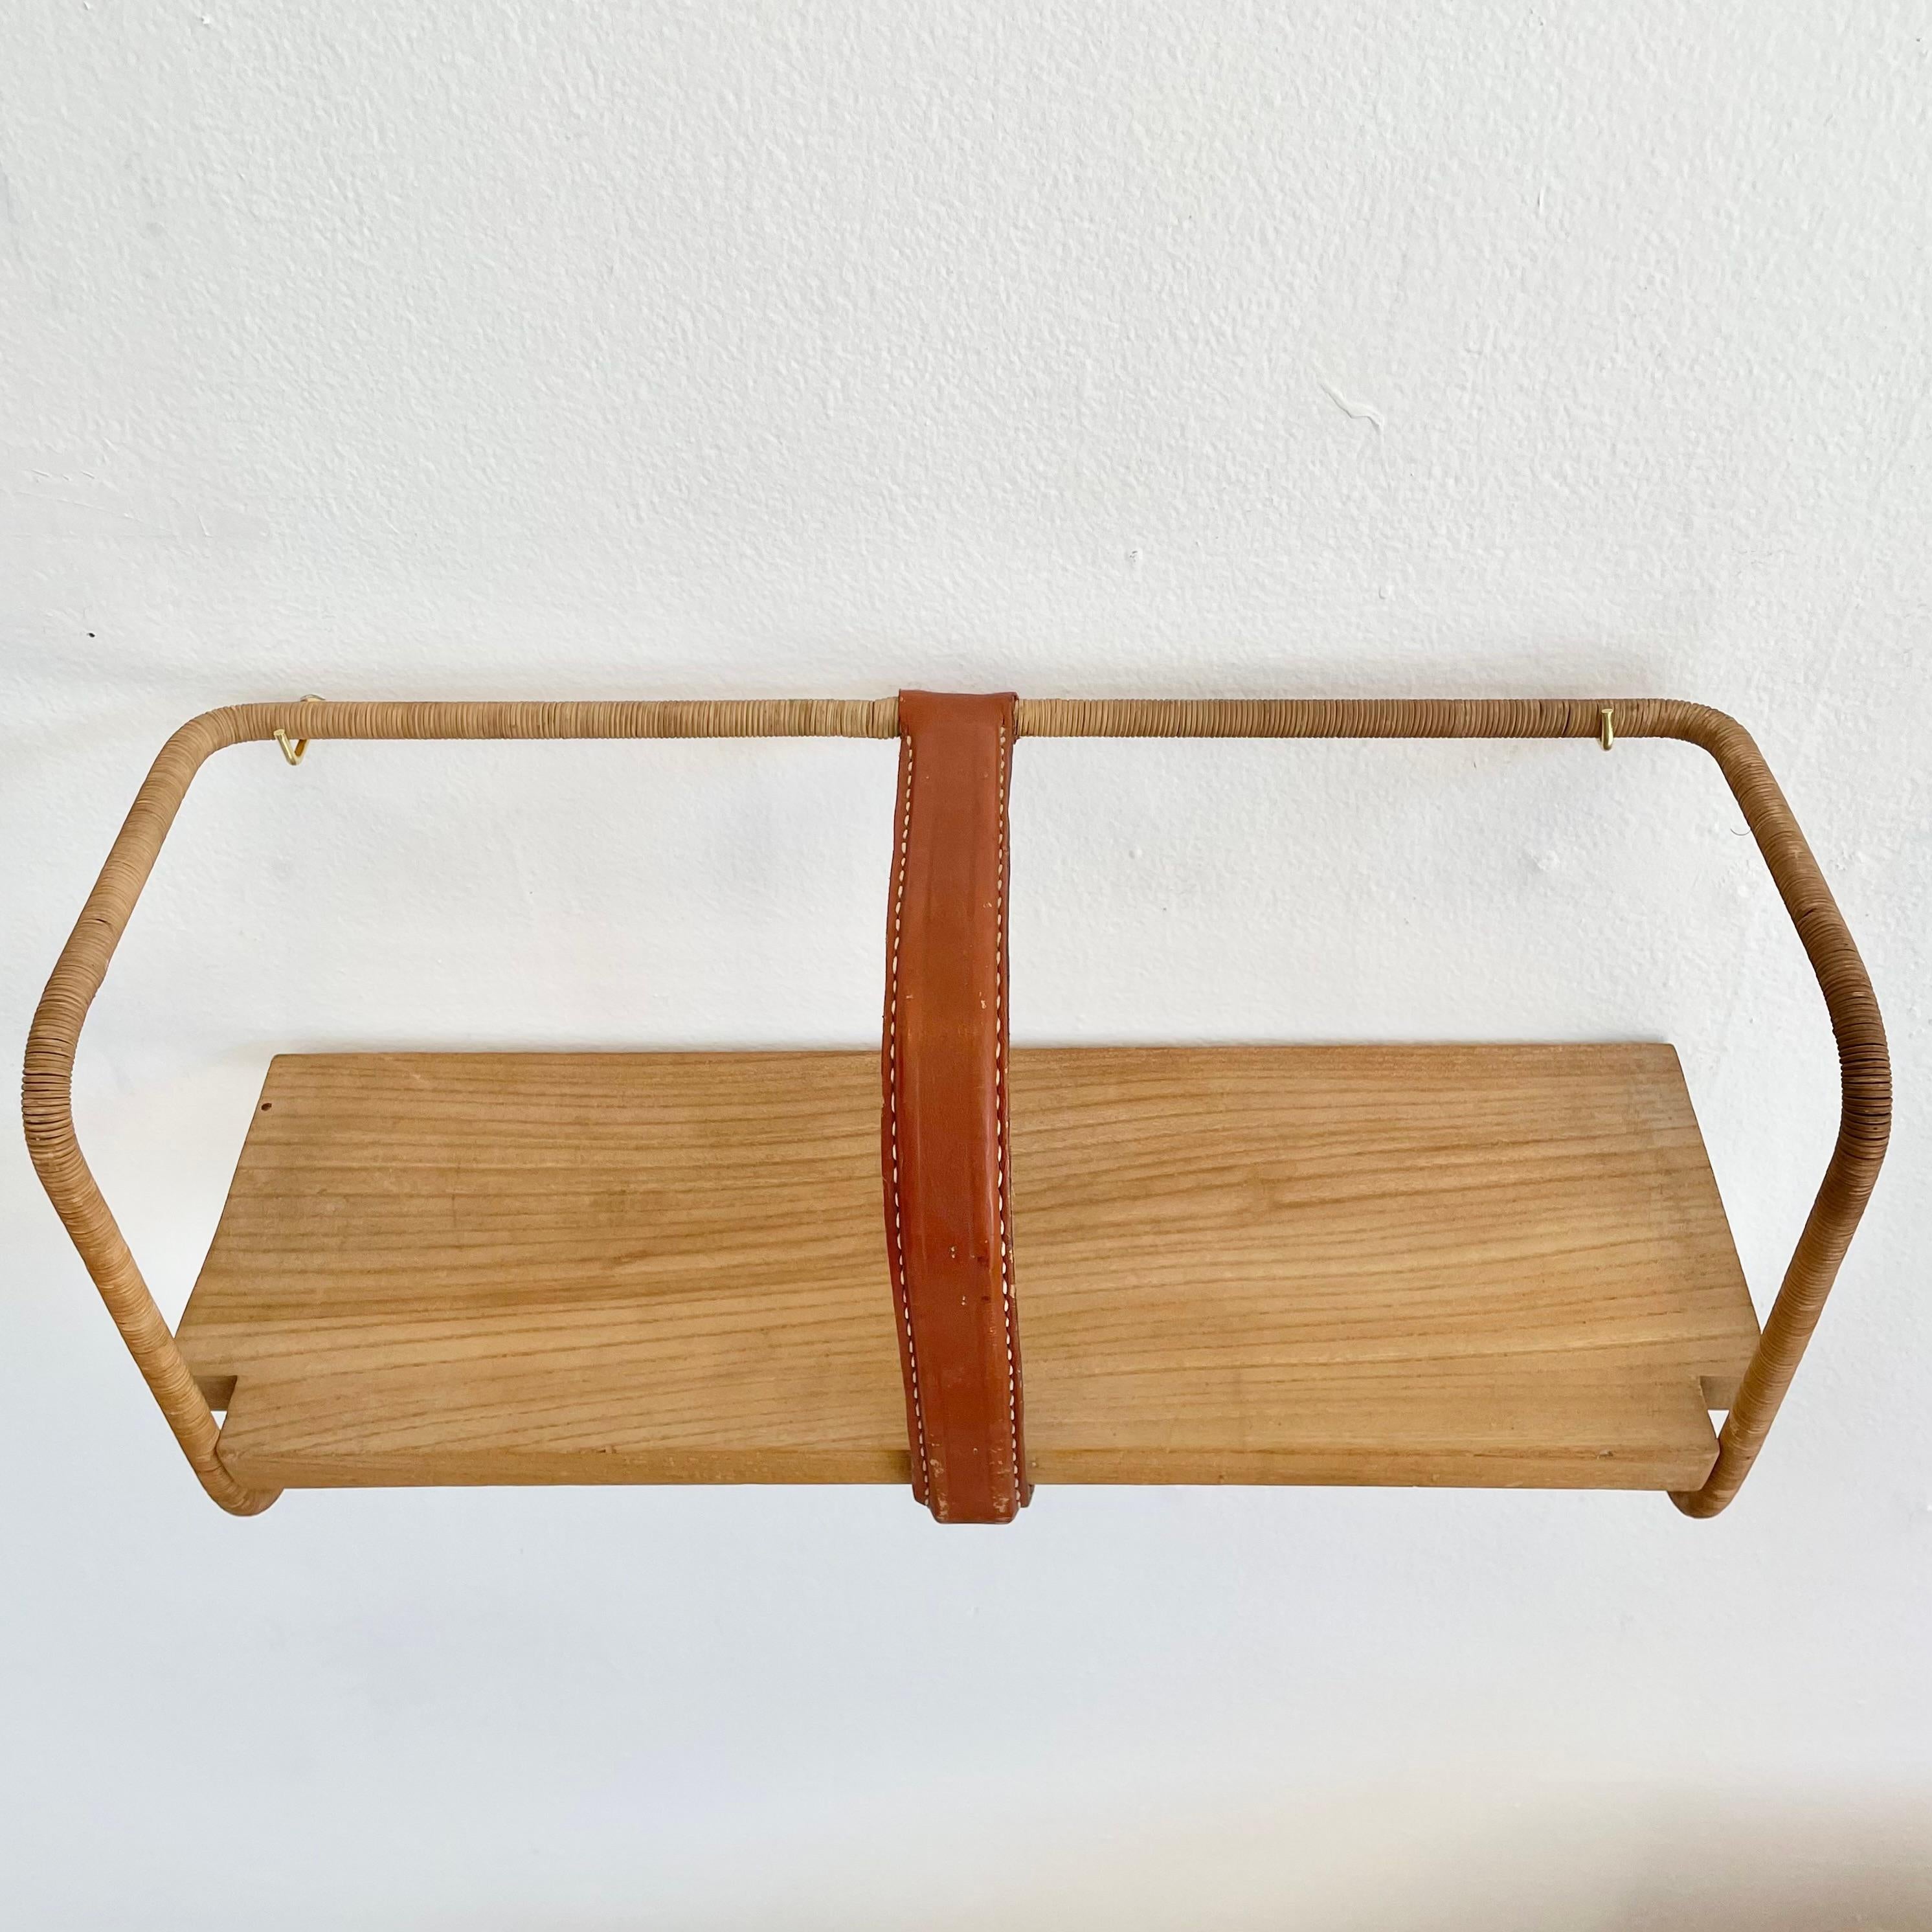 Jacques Adnet Leather, Wood and Twine Shelf, 1950s France In Good Condition For Sale In Los Angeles, CA